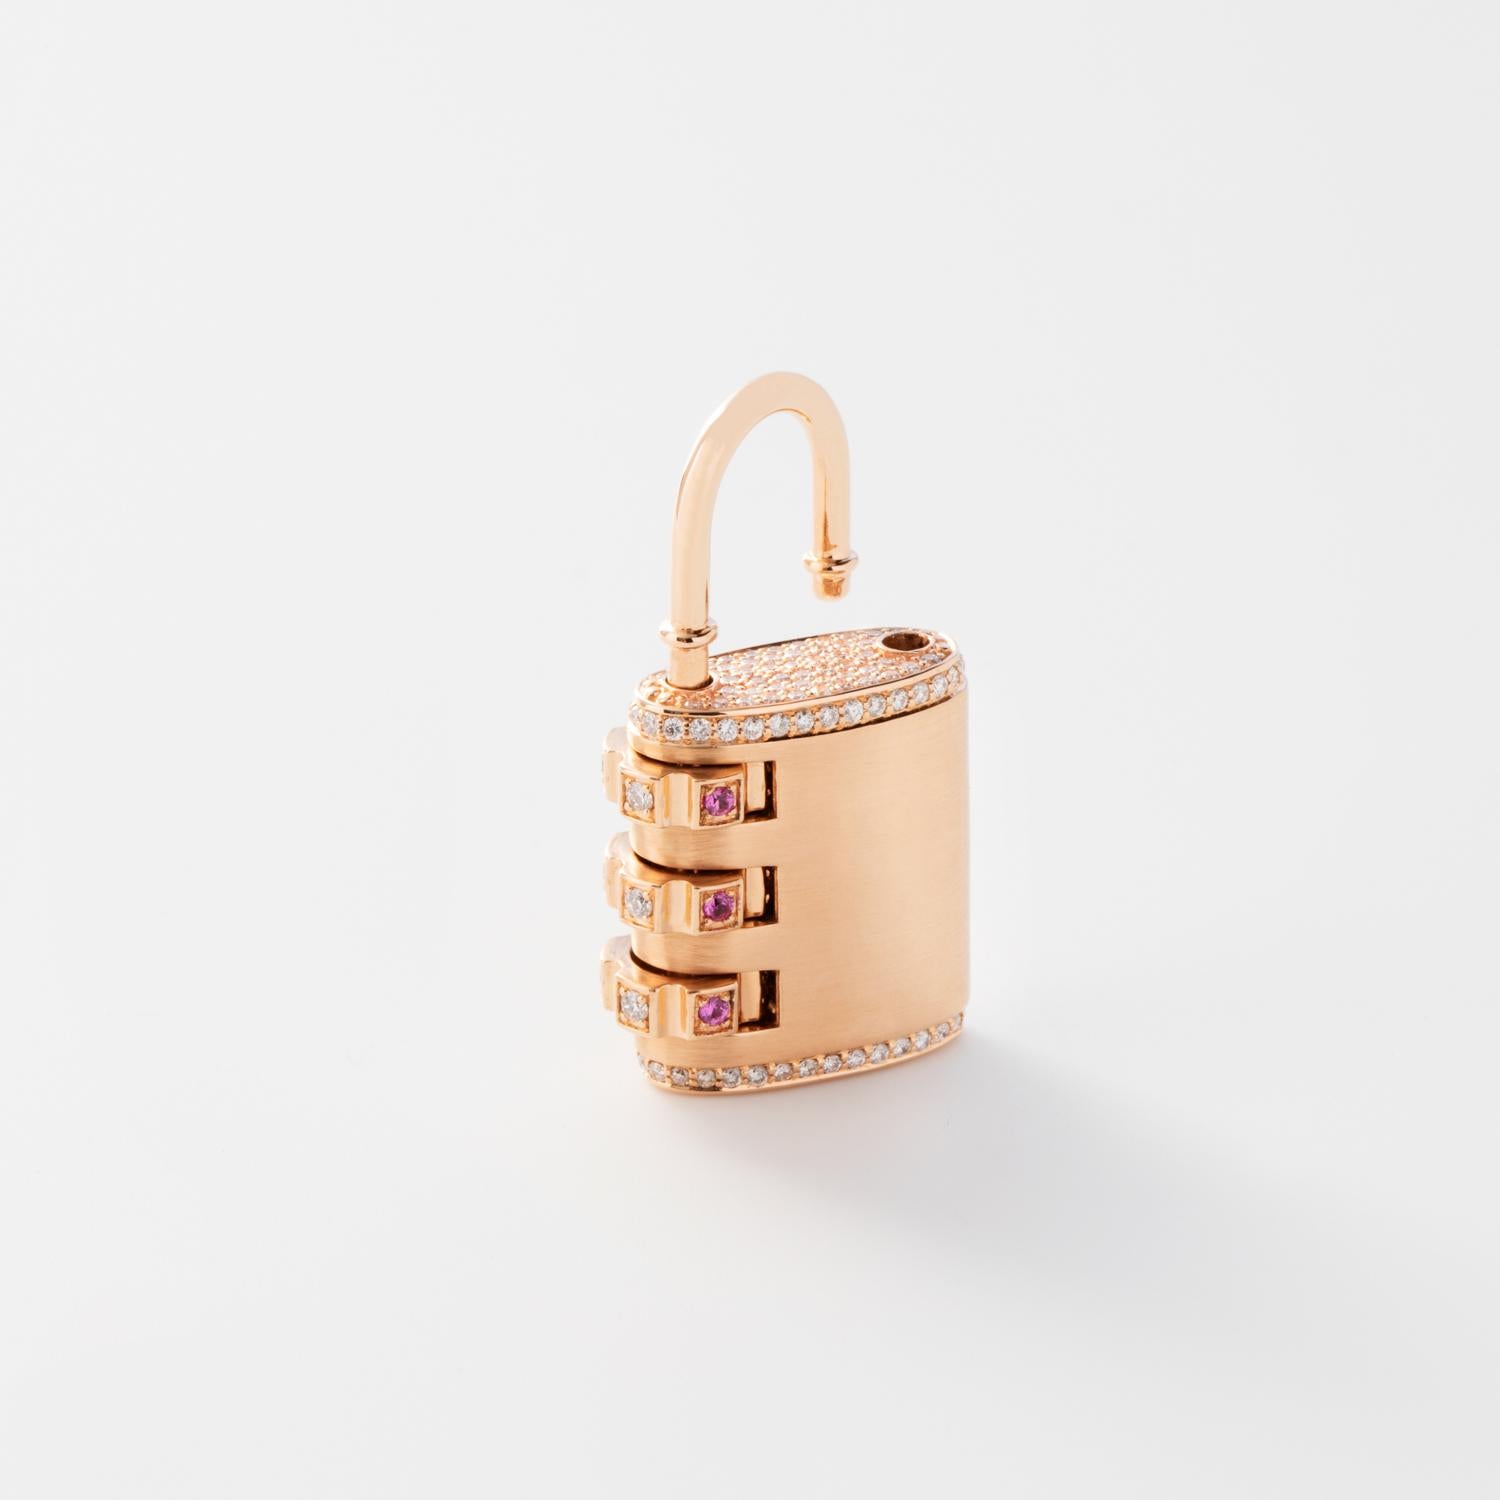 18k Padlock Pendant features a solid 18k Rose Gold pendant with pave White Diamonds throughout and white diamonds and pink sapphires on the dial, and a custom code that locks and unlocks the pendant. 
Lock Combination can be customized with any